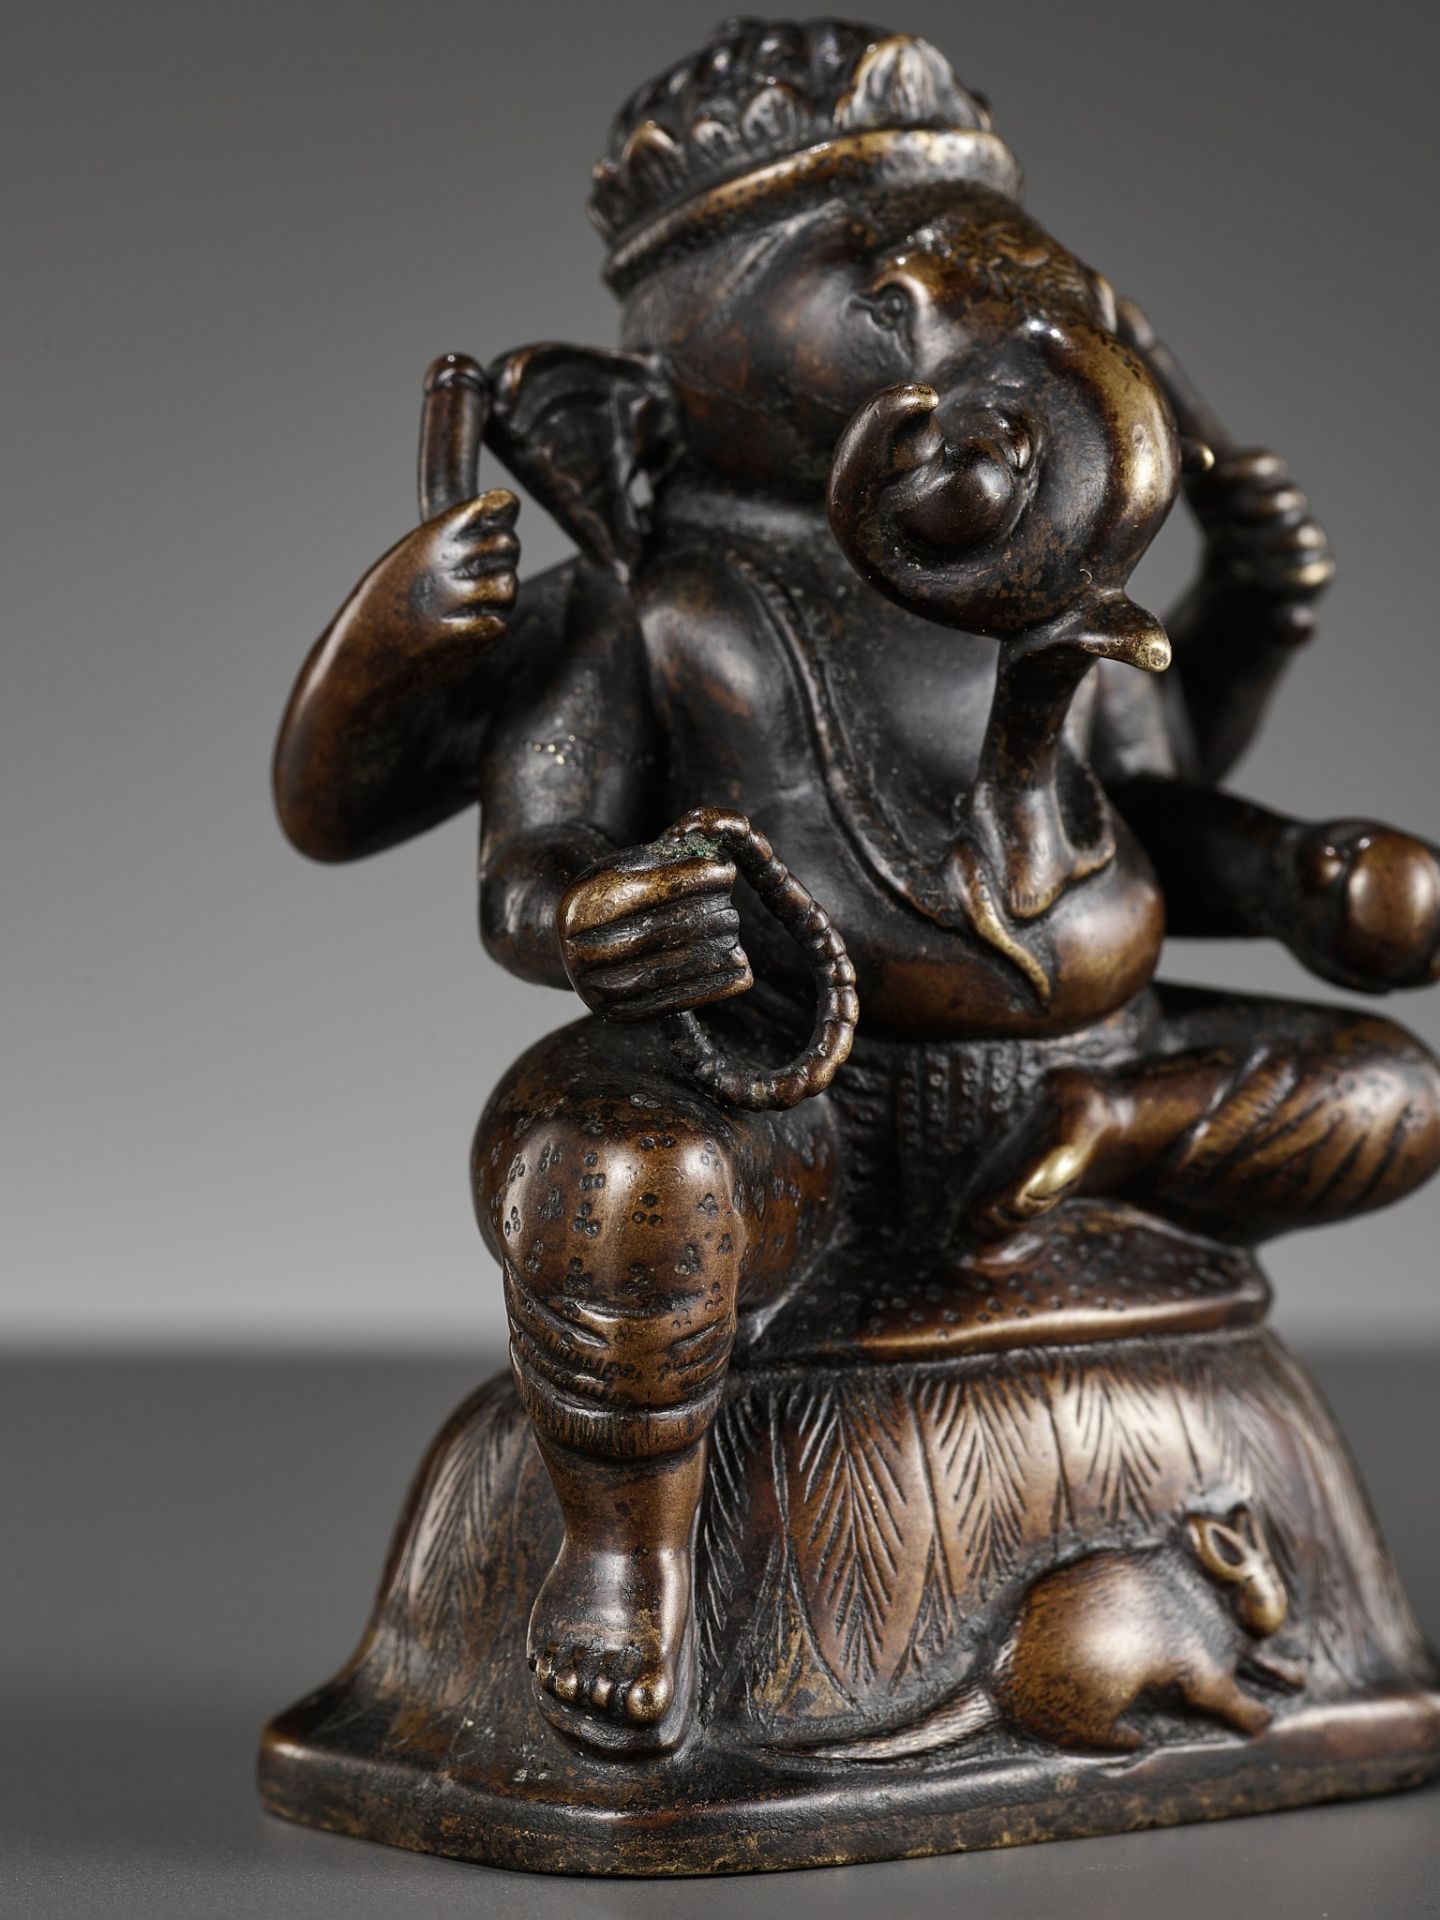 A SMALL BRONZE FIGURE OF GANESHA, SOUTH INDIA, 17TH - 18TH CENTURY - Image 3 of 14